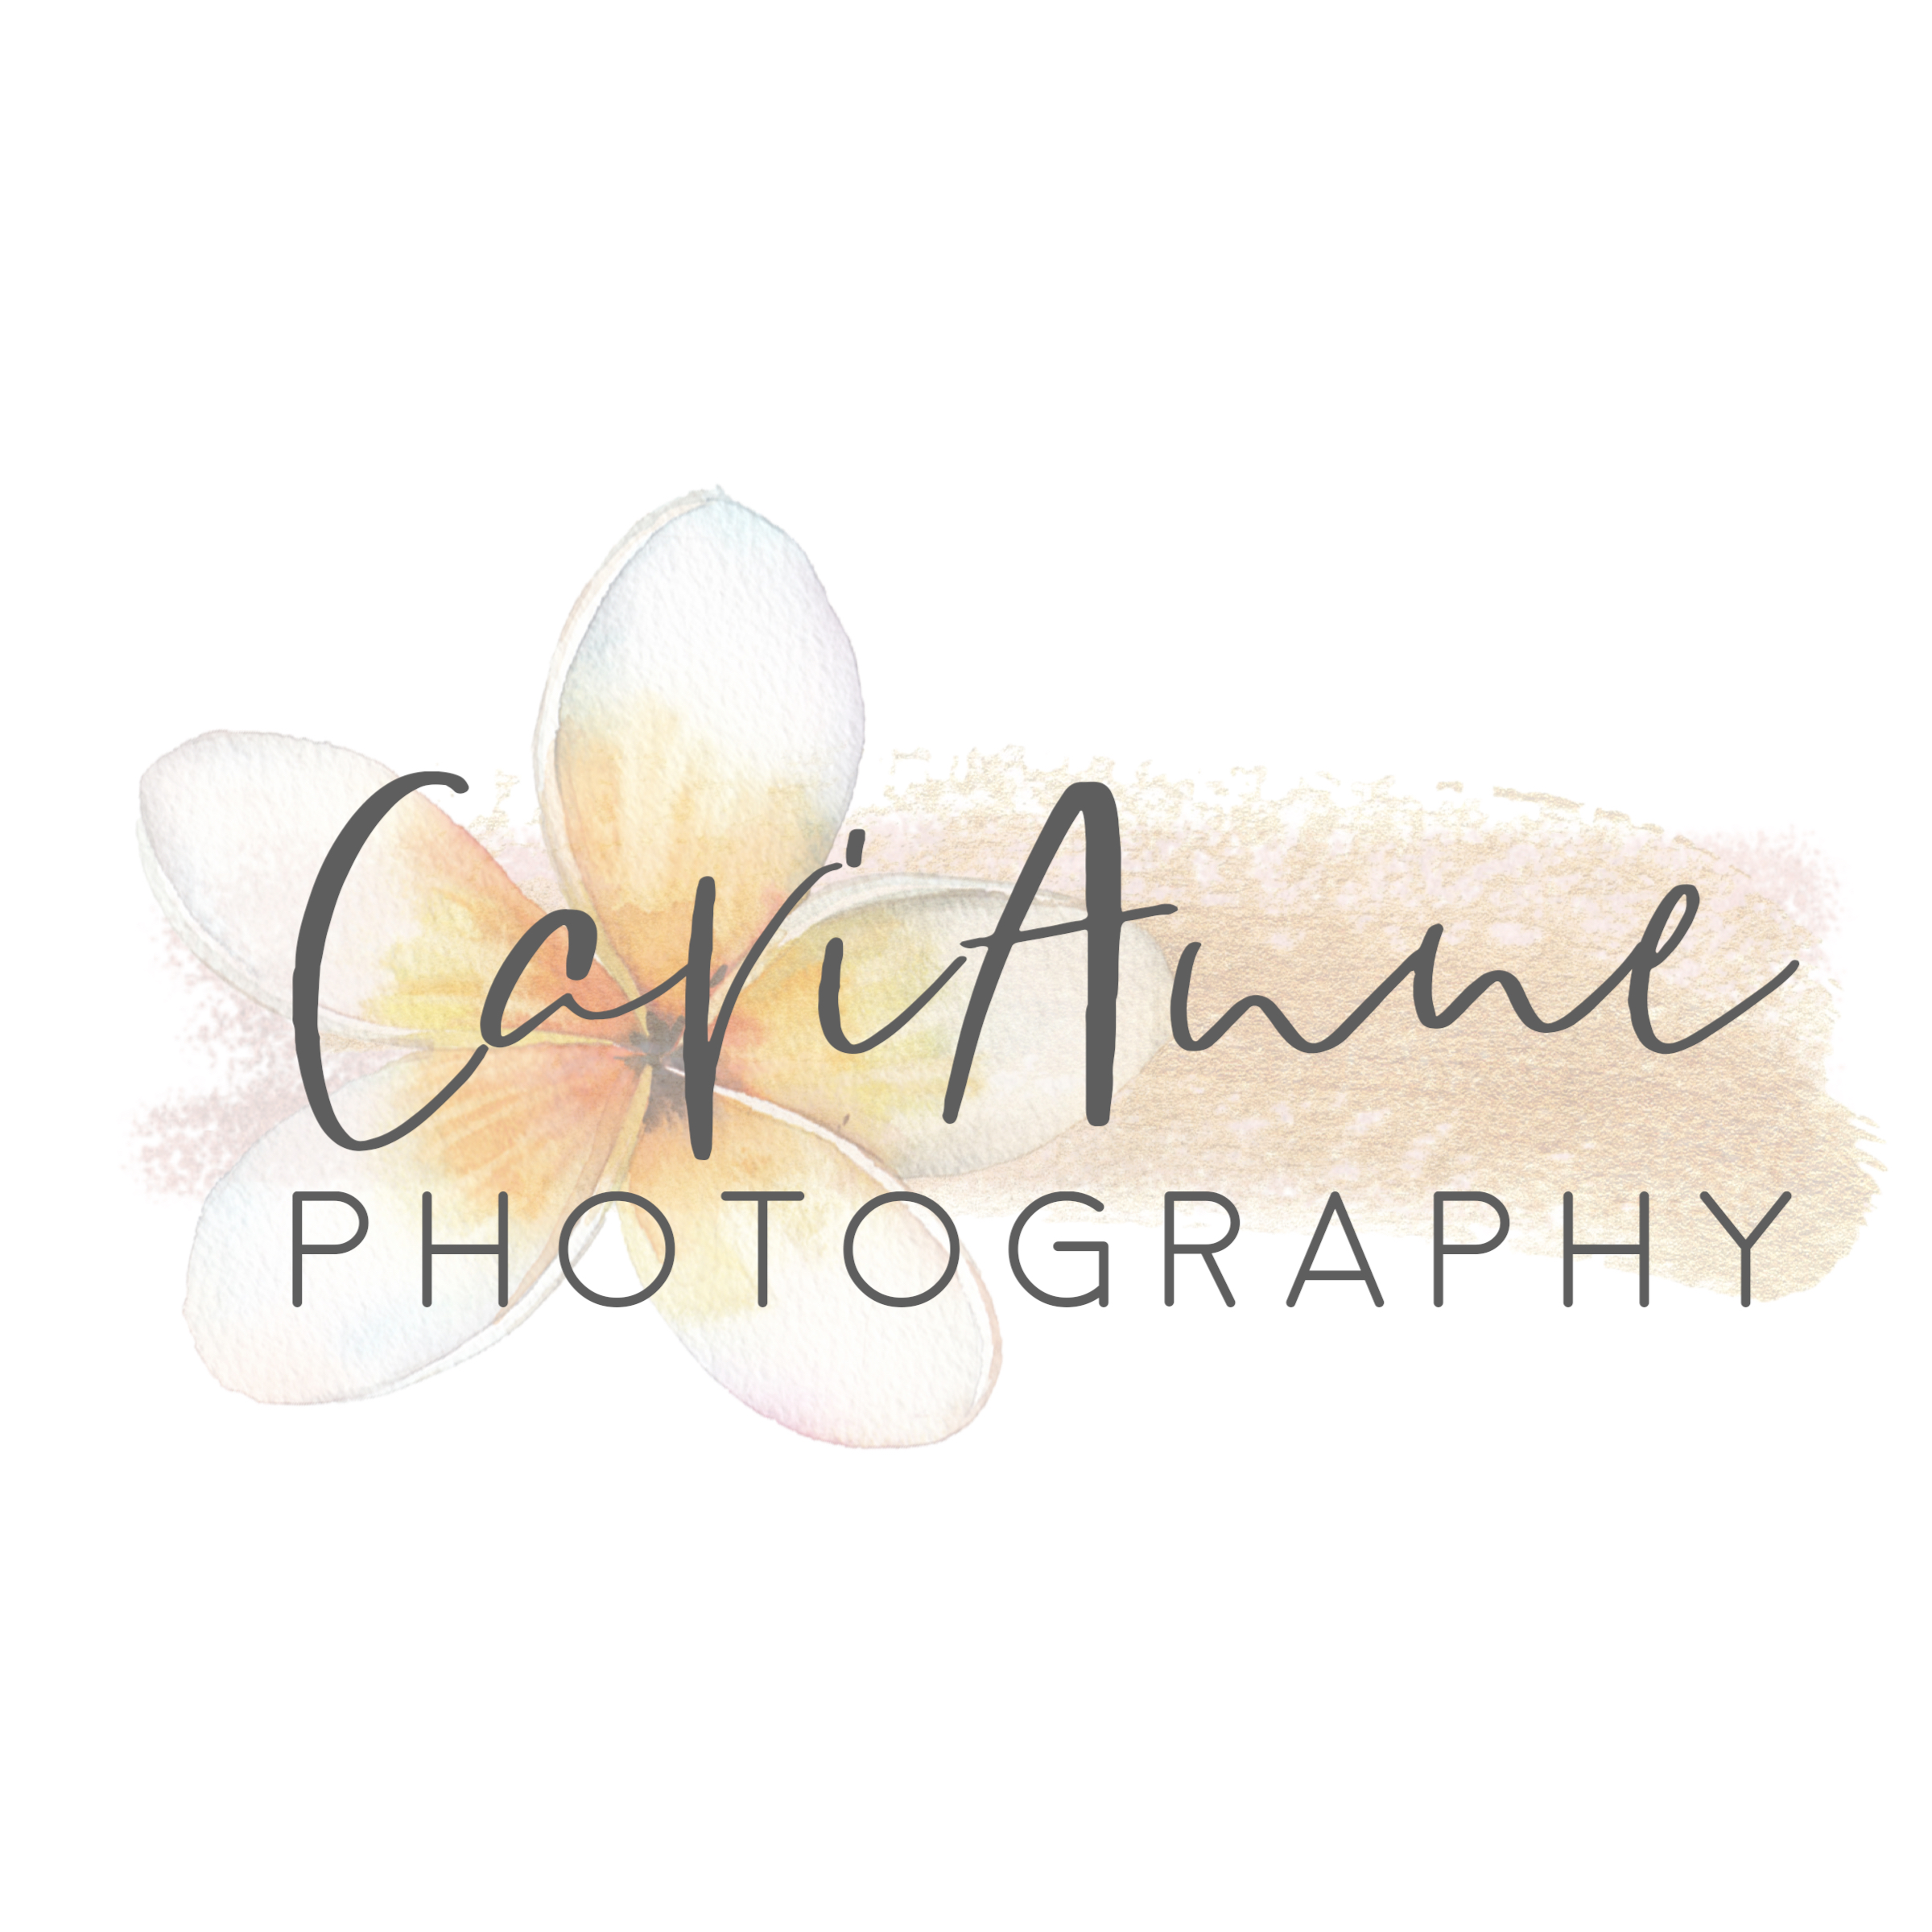 CariAnne Photograpy